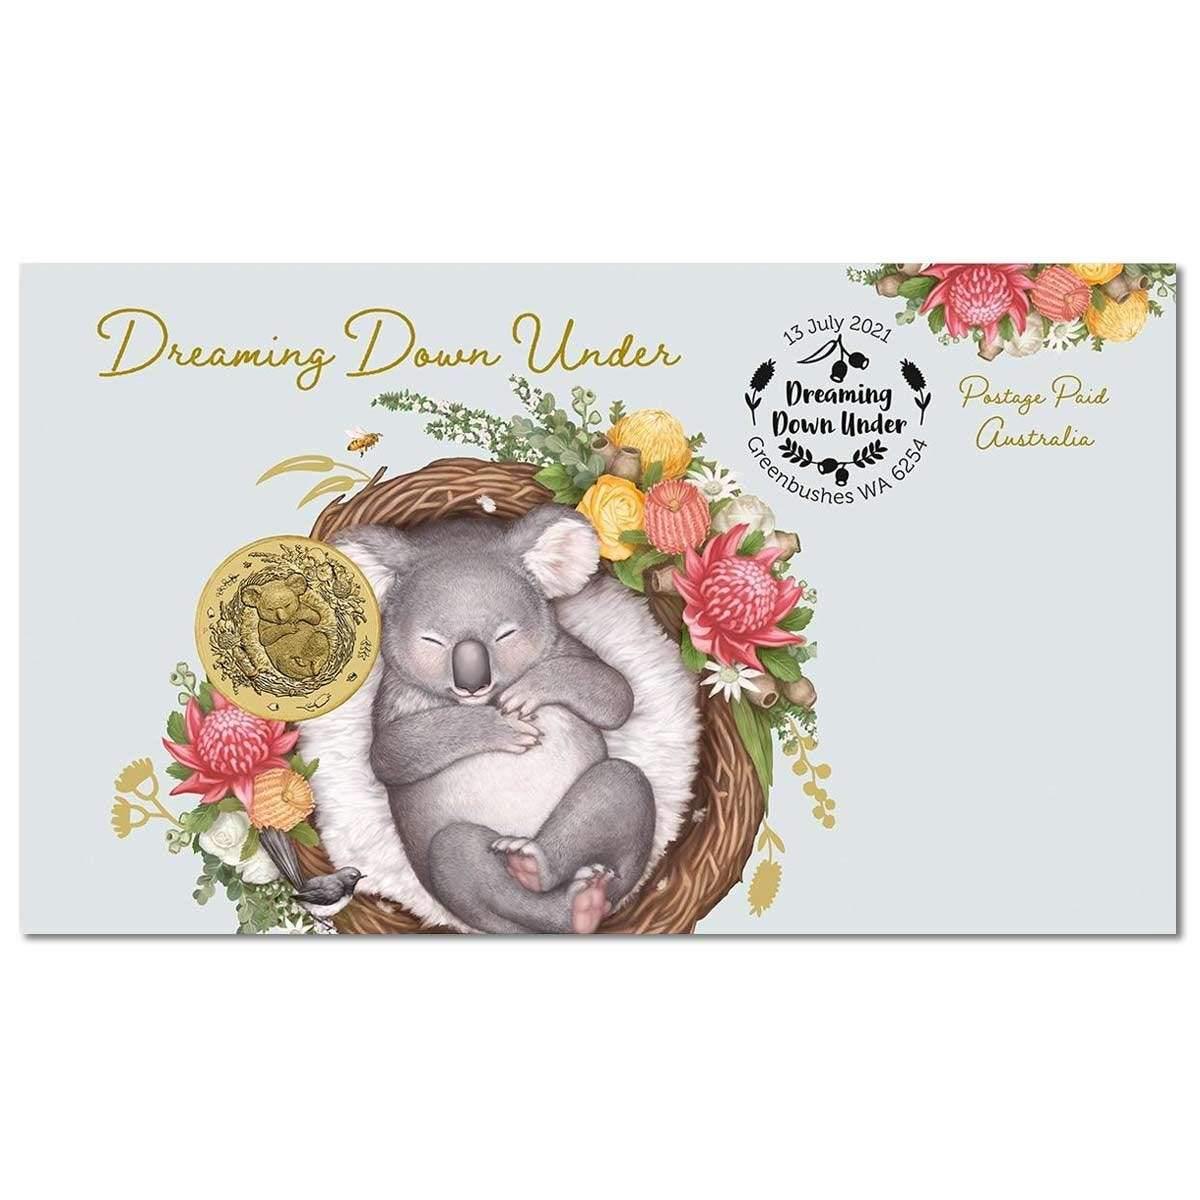 2021 Dreaming Down Under Koala $1 Coin and Stamp Cover - Loose Change Coins